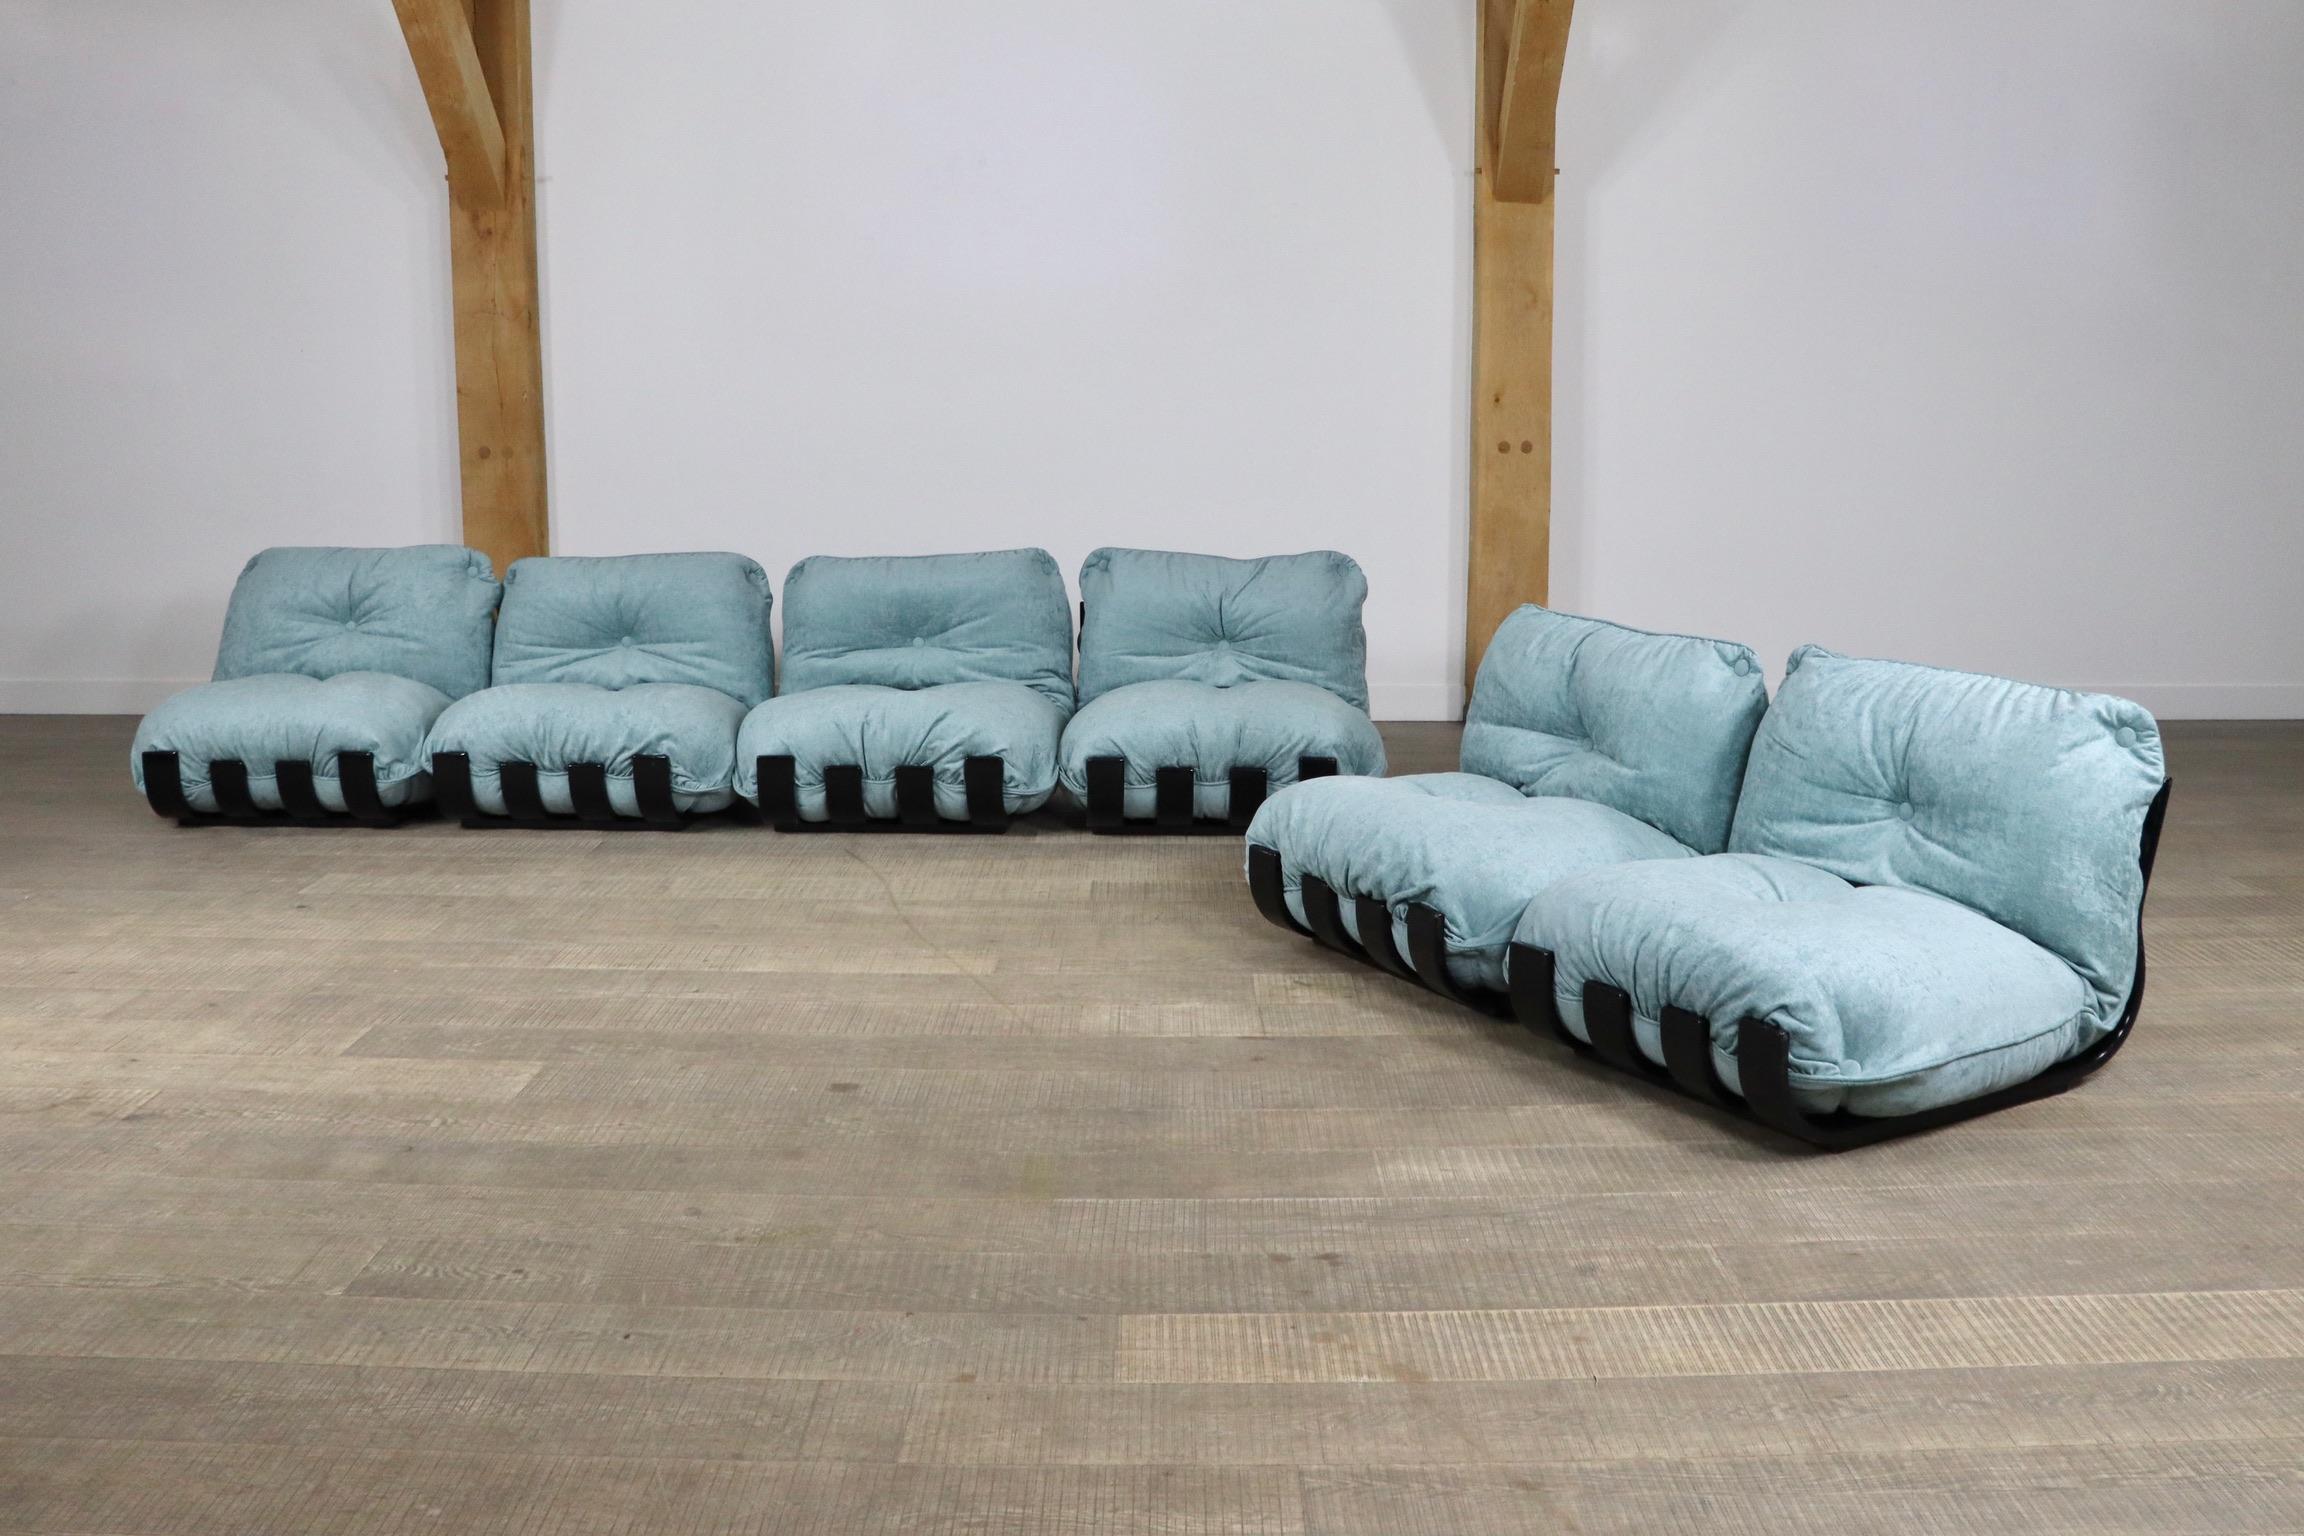 Sectional Gran Visir Sofa in Blue Velvet by Luciano Frigerio, Italy, 1970s For Sale 4